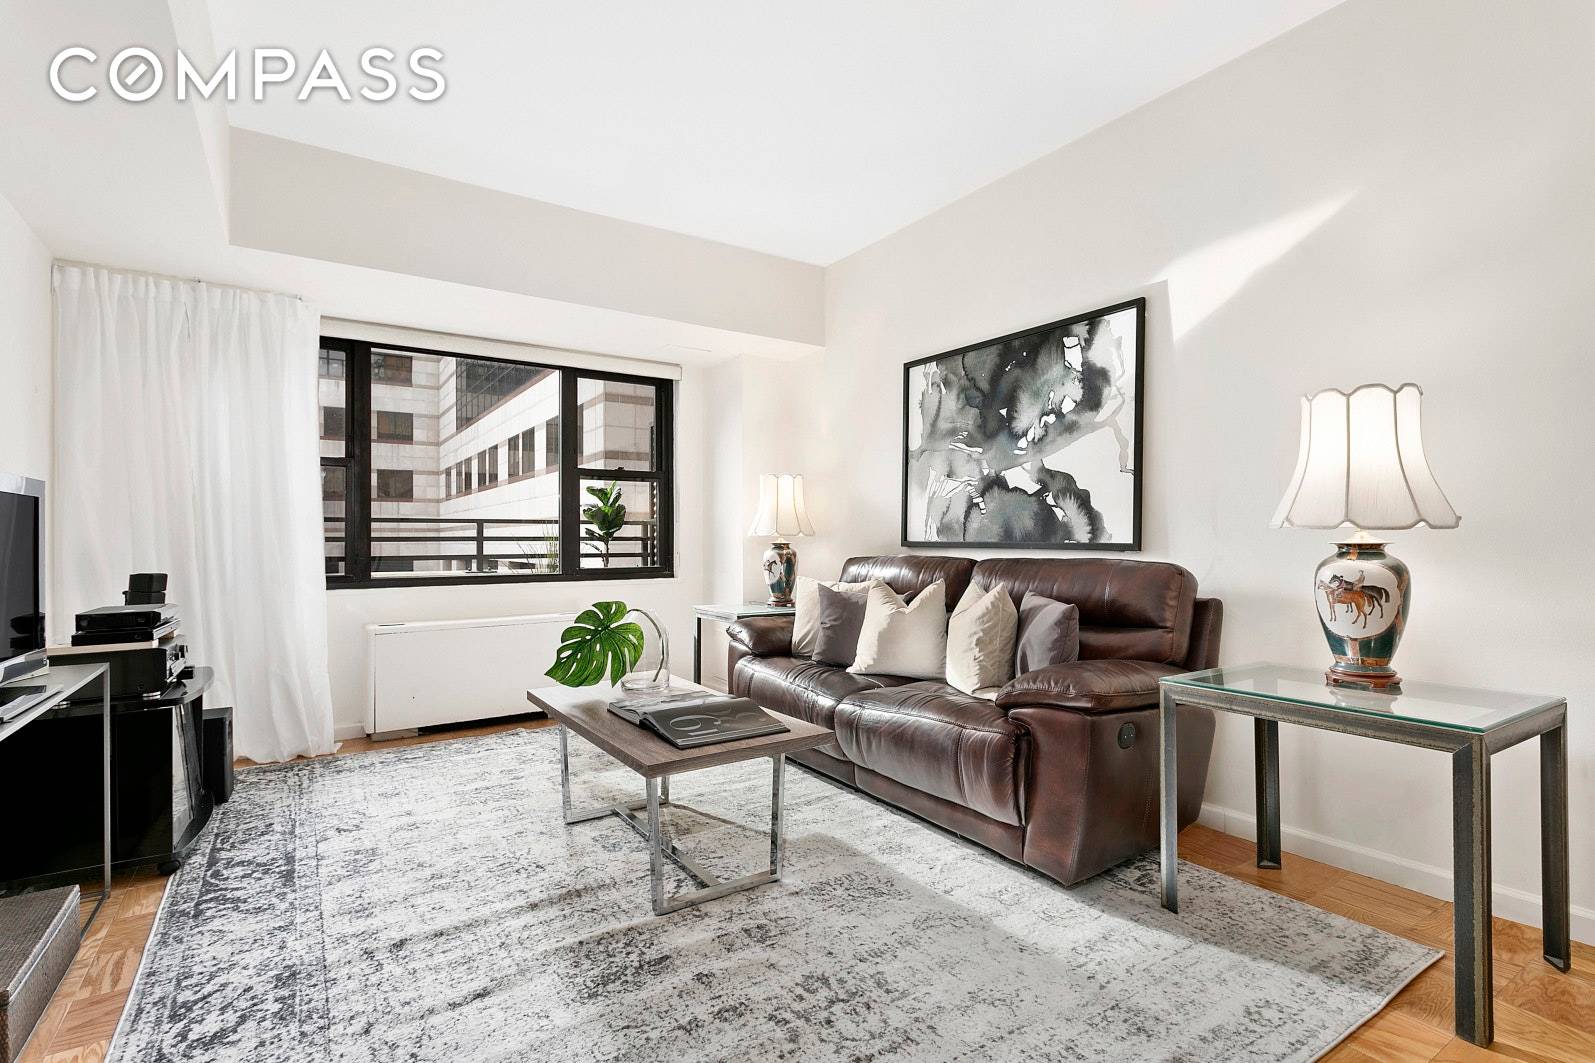 HANDSOME JUMBO 1 BEDROOM PERFECT PIED A TERRE HIGHEST CEILINGS IN BUILDING ON PRIZED 12TH FLOOR LINCOLN CENTER amp ; SKYLINE VIEWS FROM BIG PEACEFUL BEDROOM ALL DAY, SUNSHINY, SOUTHERN ...